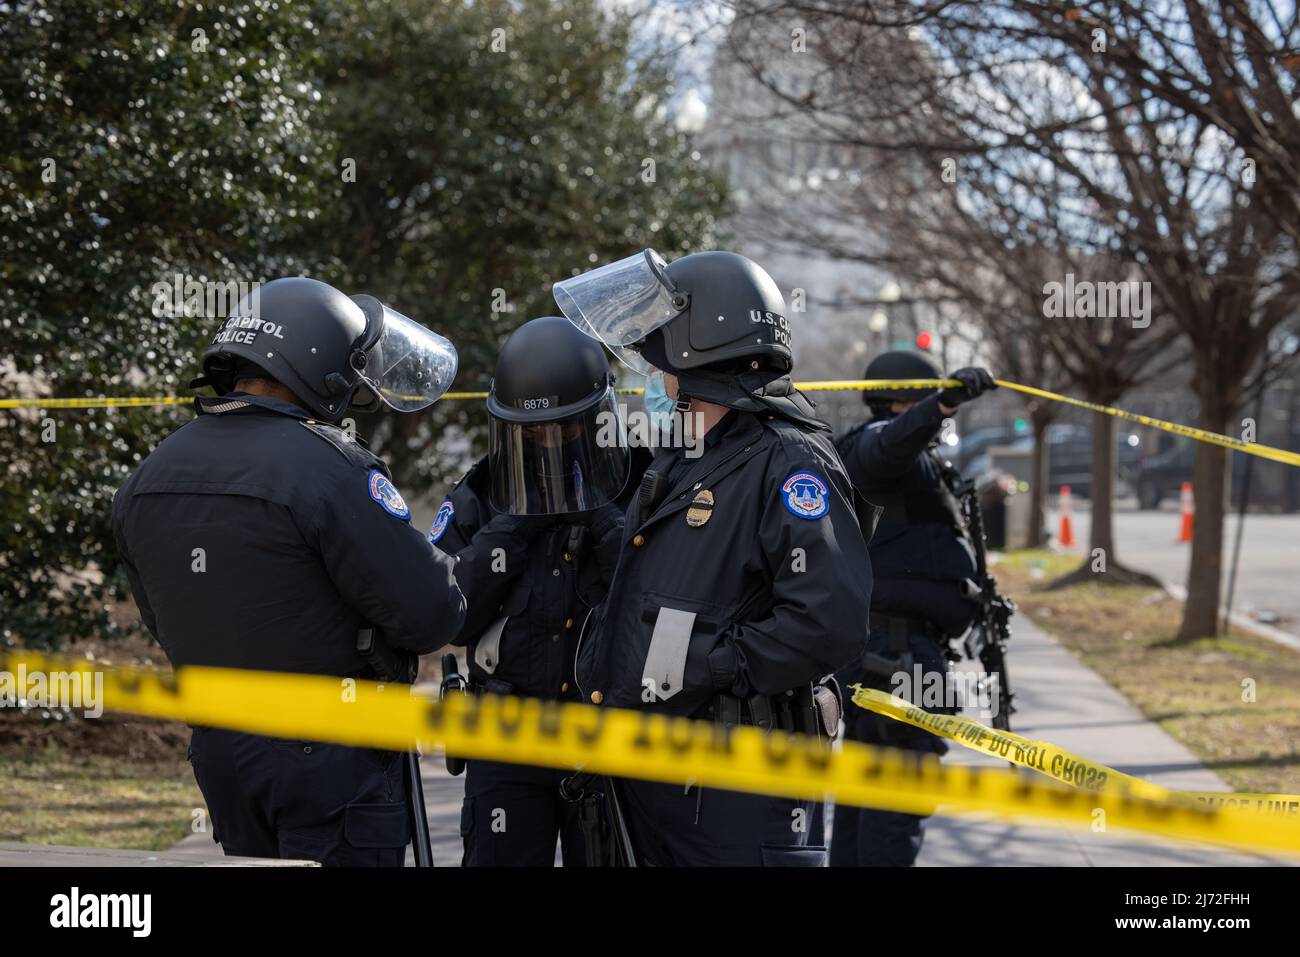 WASHINGTON, D.C. – January 20, 2021: United States Capitol Police are seen near the U.S. Capitol on Inauguration Day 2021. Stock Photo